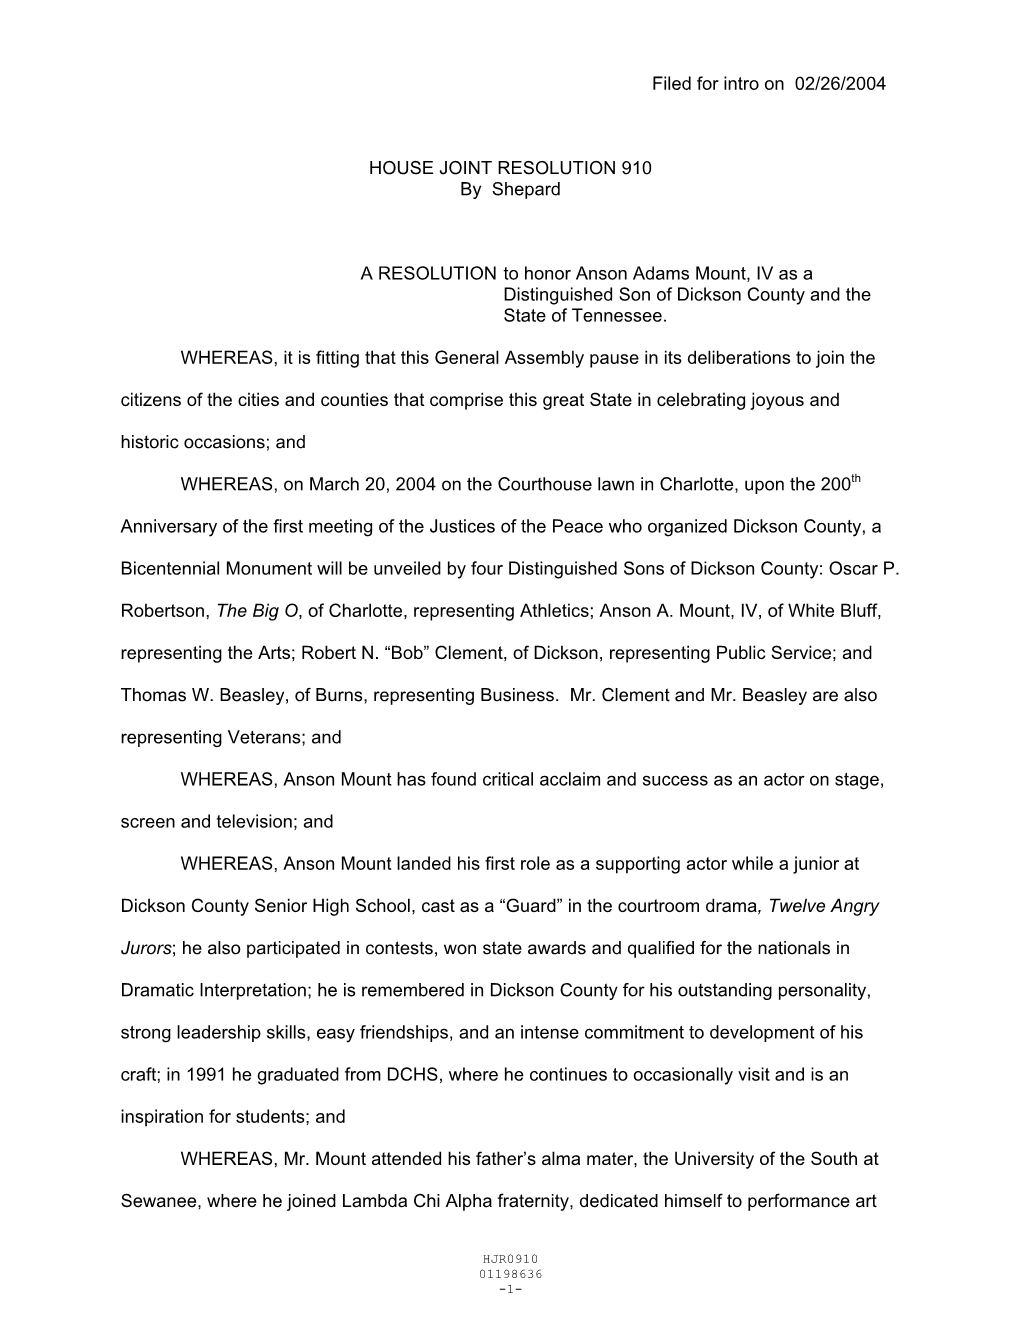 Filed for Intro on 02/26/2004 HOUSE JOINT RESOLUTION 910 By